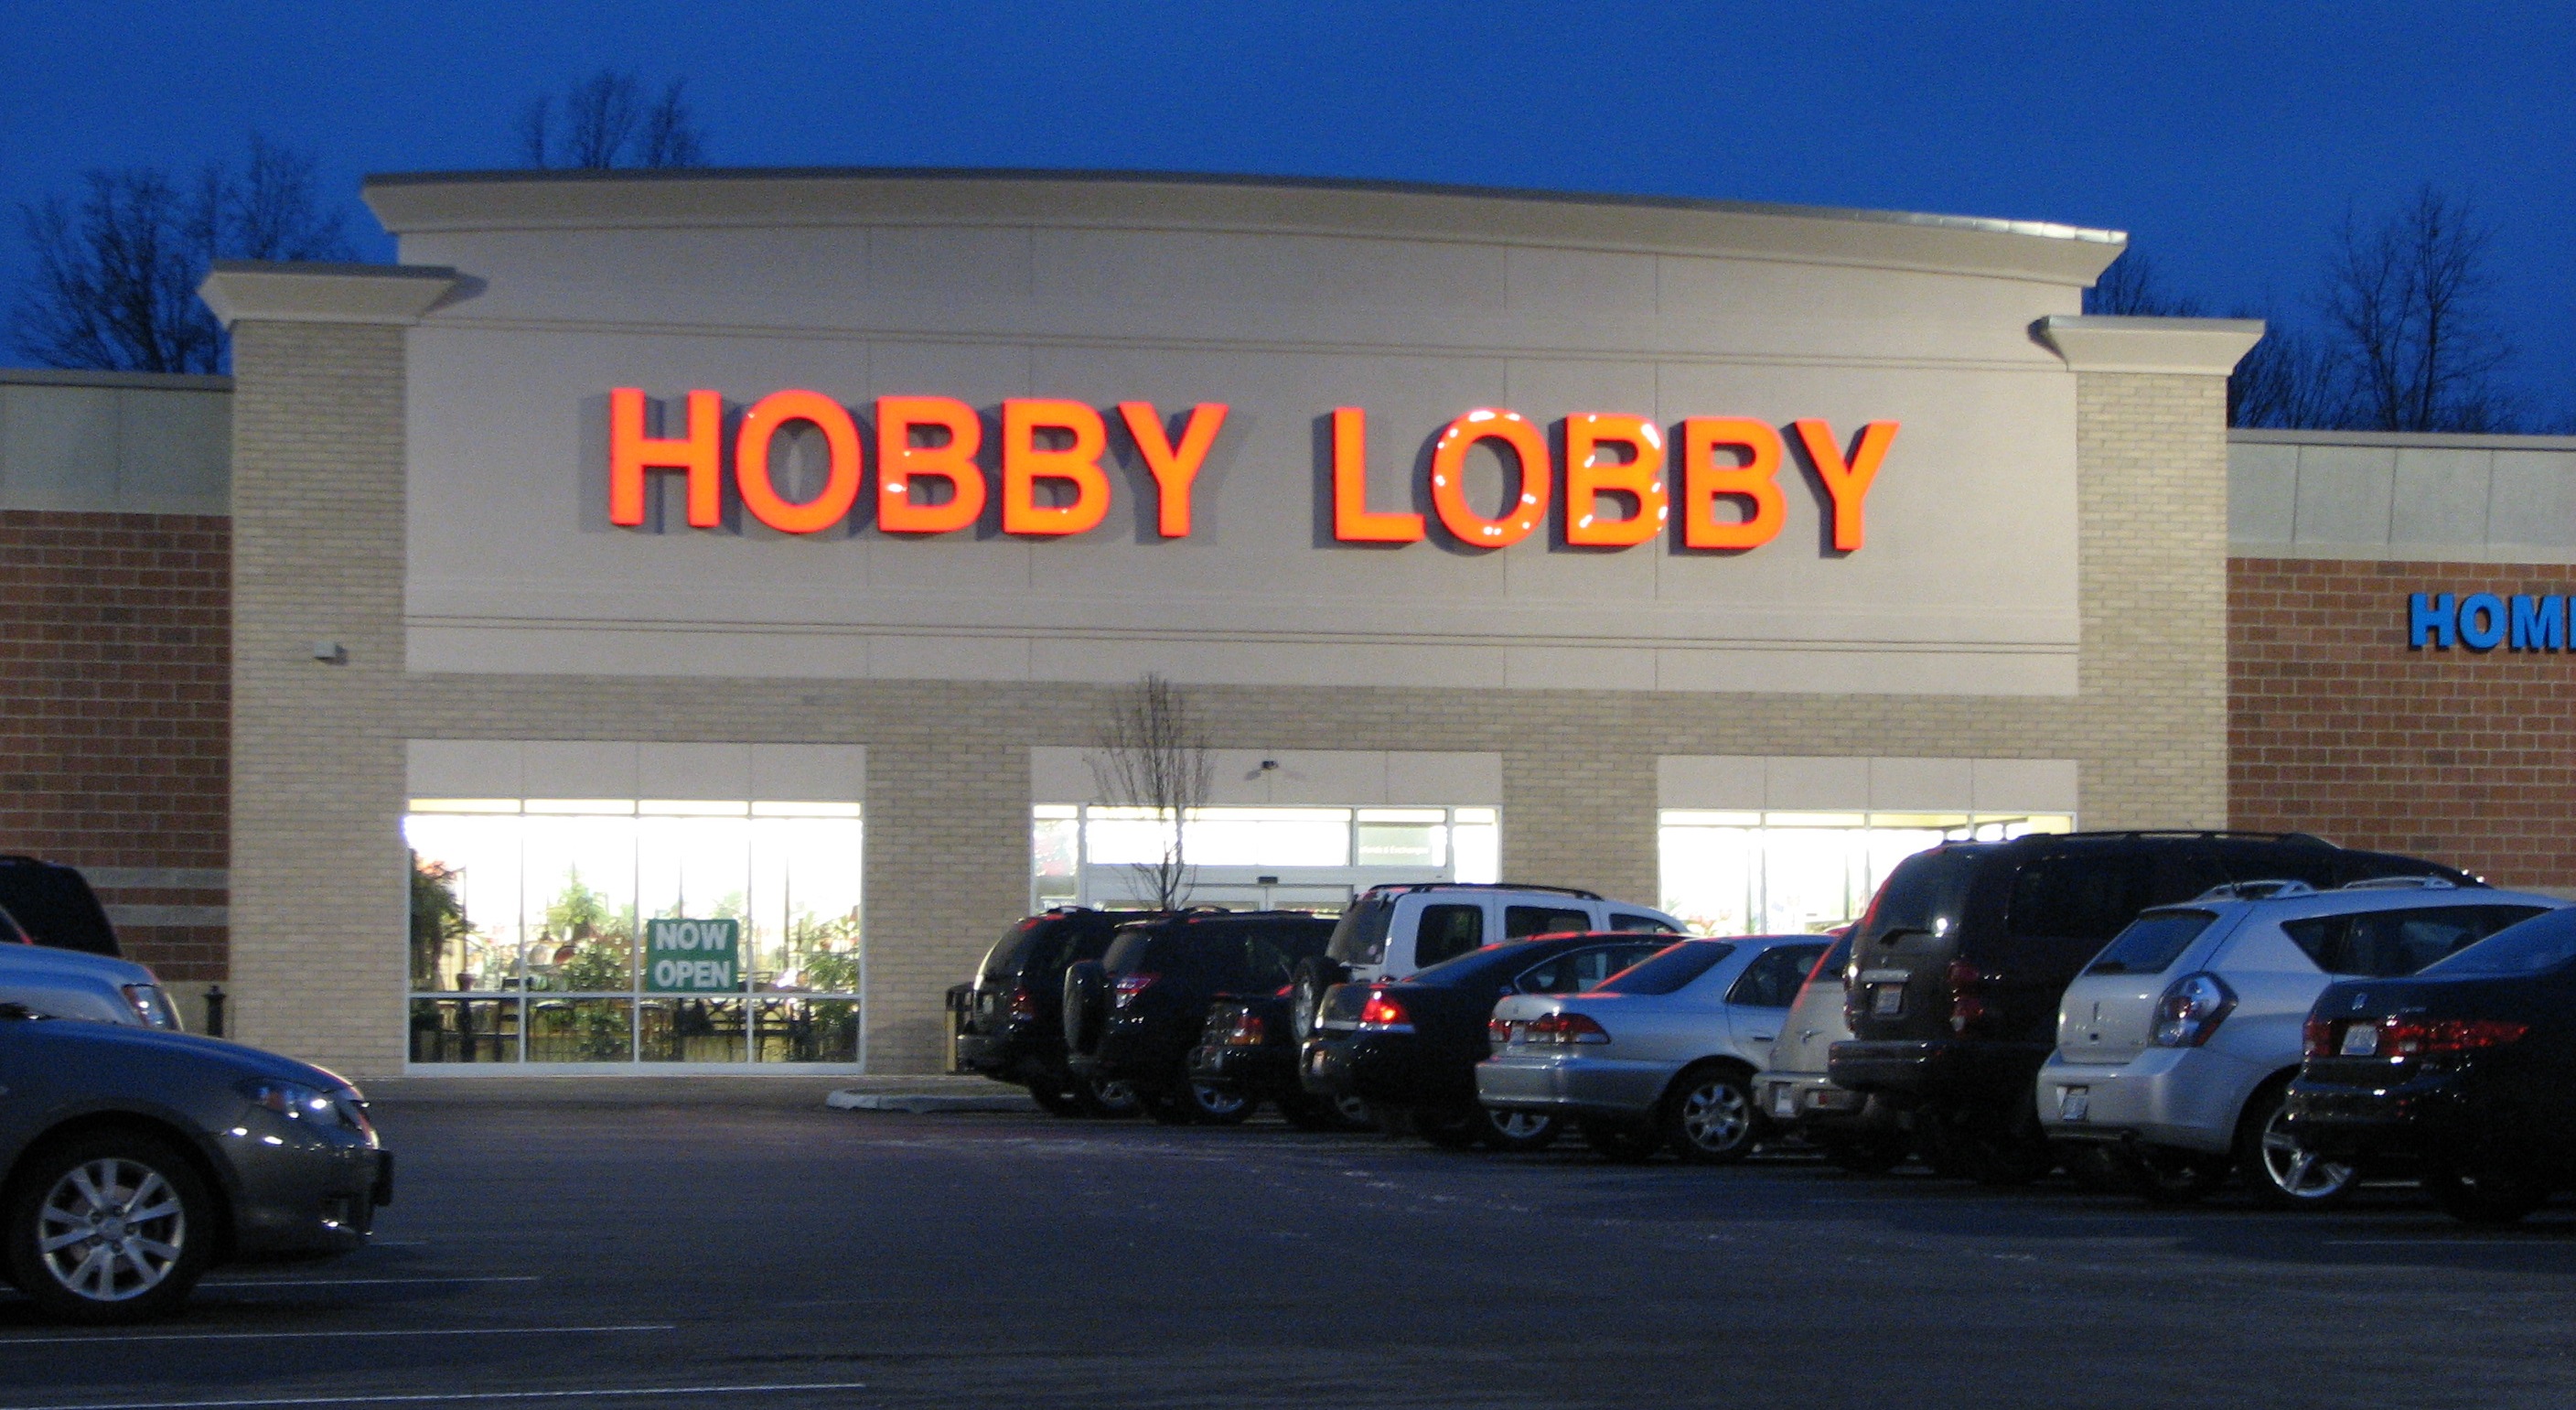 Hobby Lobby Chooses to Remain Open Amid Coronavirus Pandemic, Says ‘We Know That God is in Control’